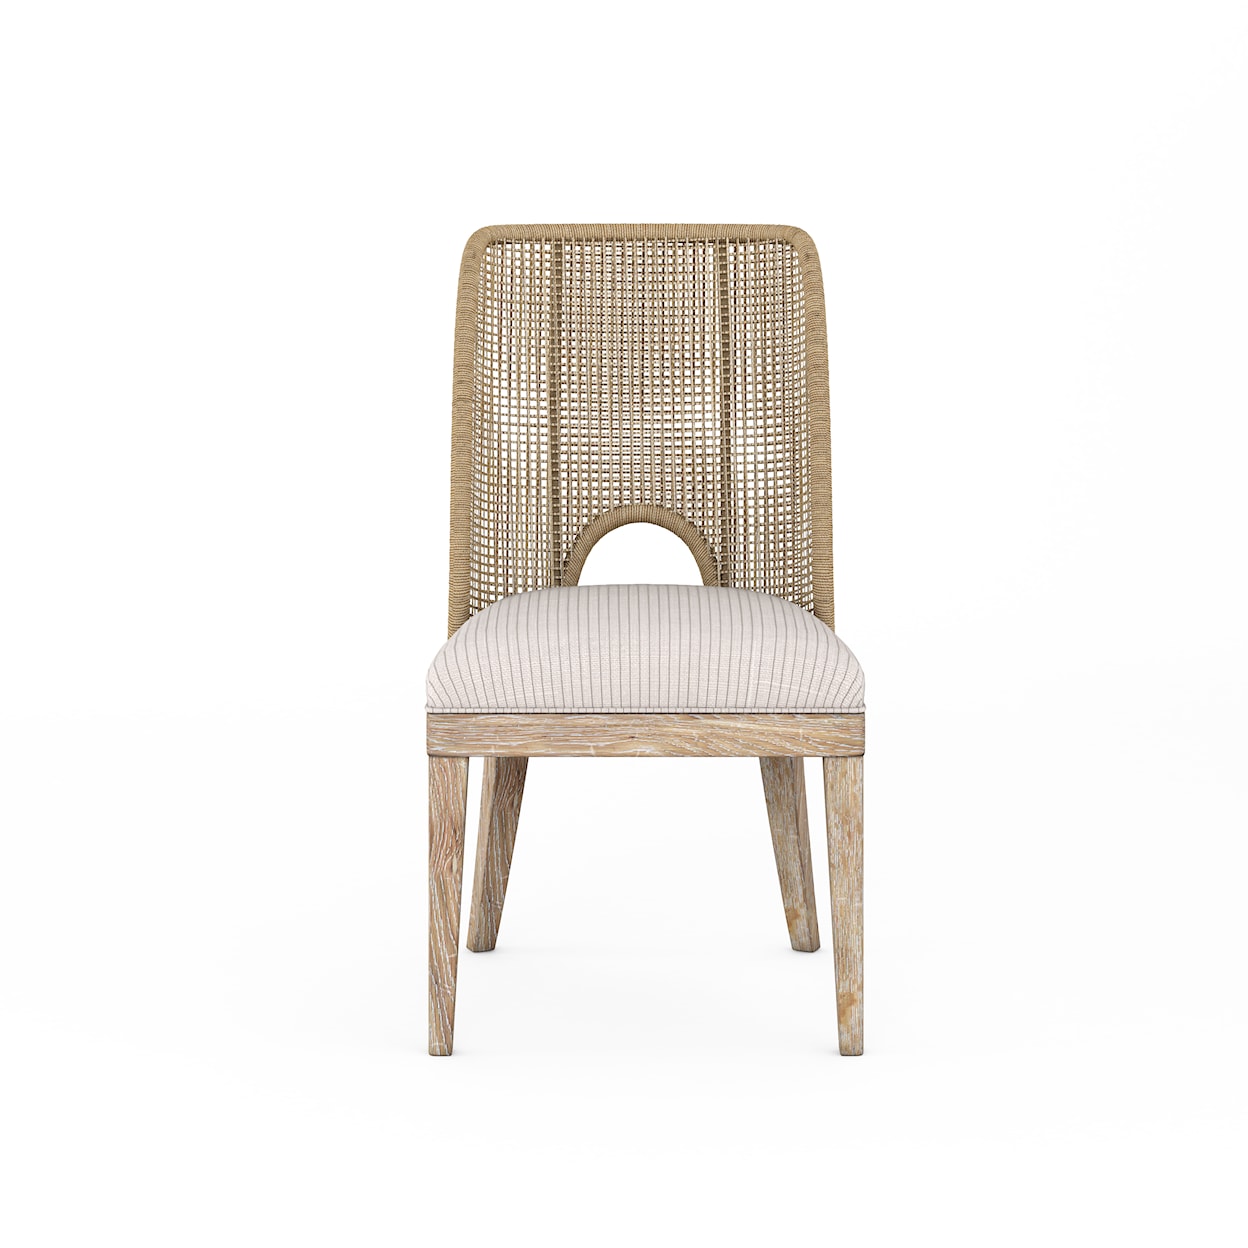 A.R.T. Furniture Inc Frame Woven Sling Chair